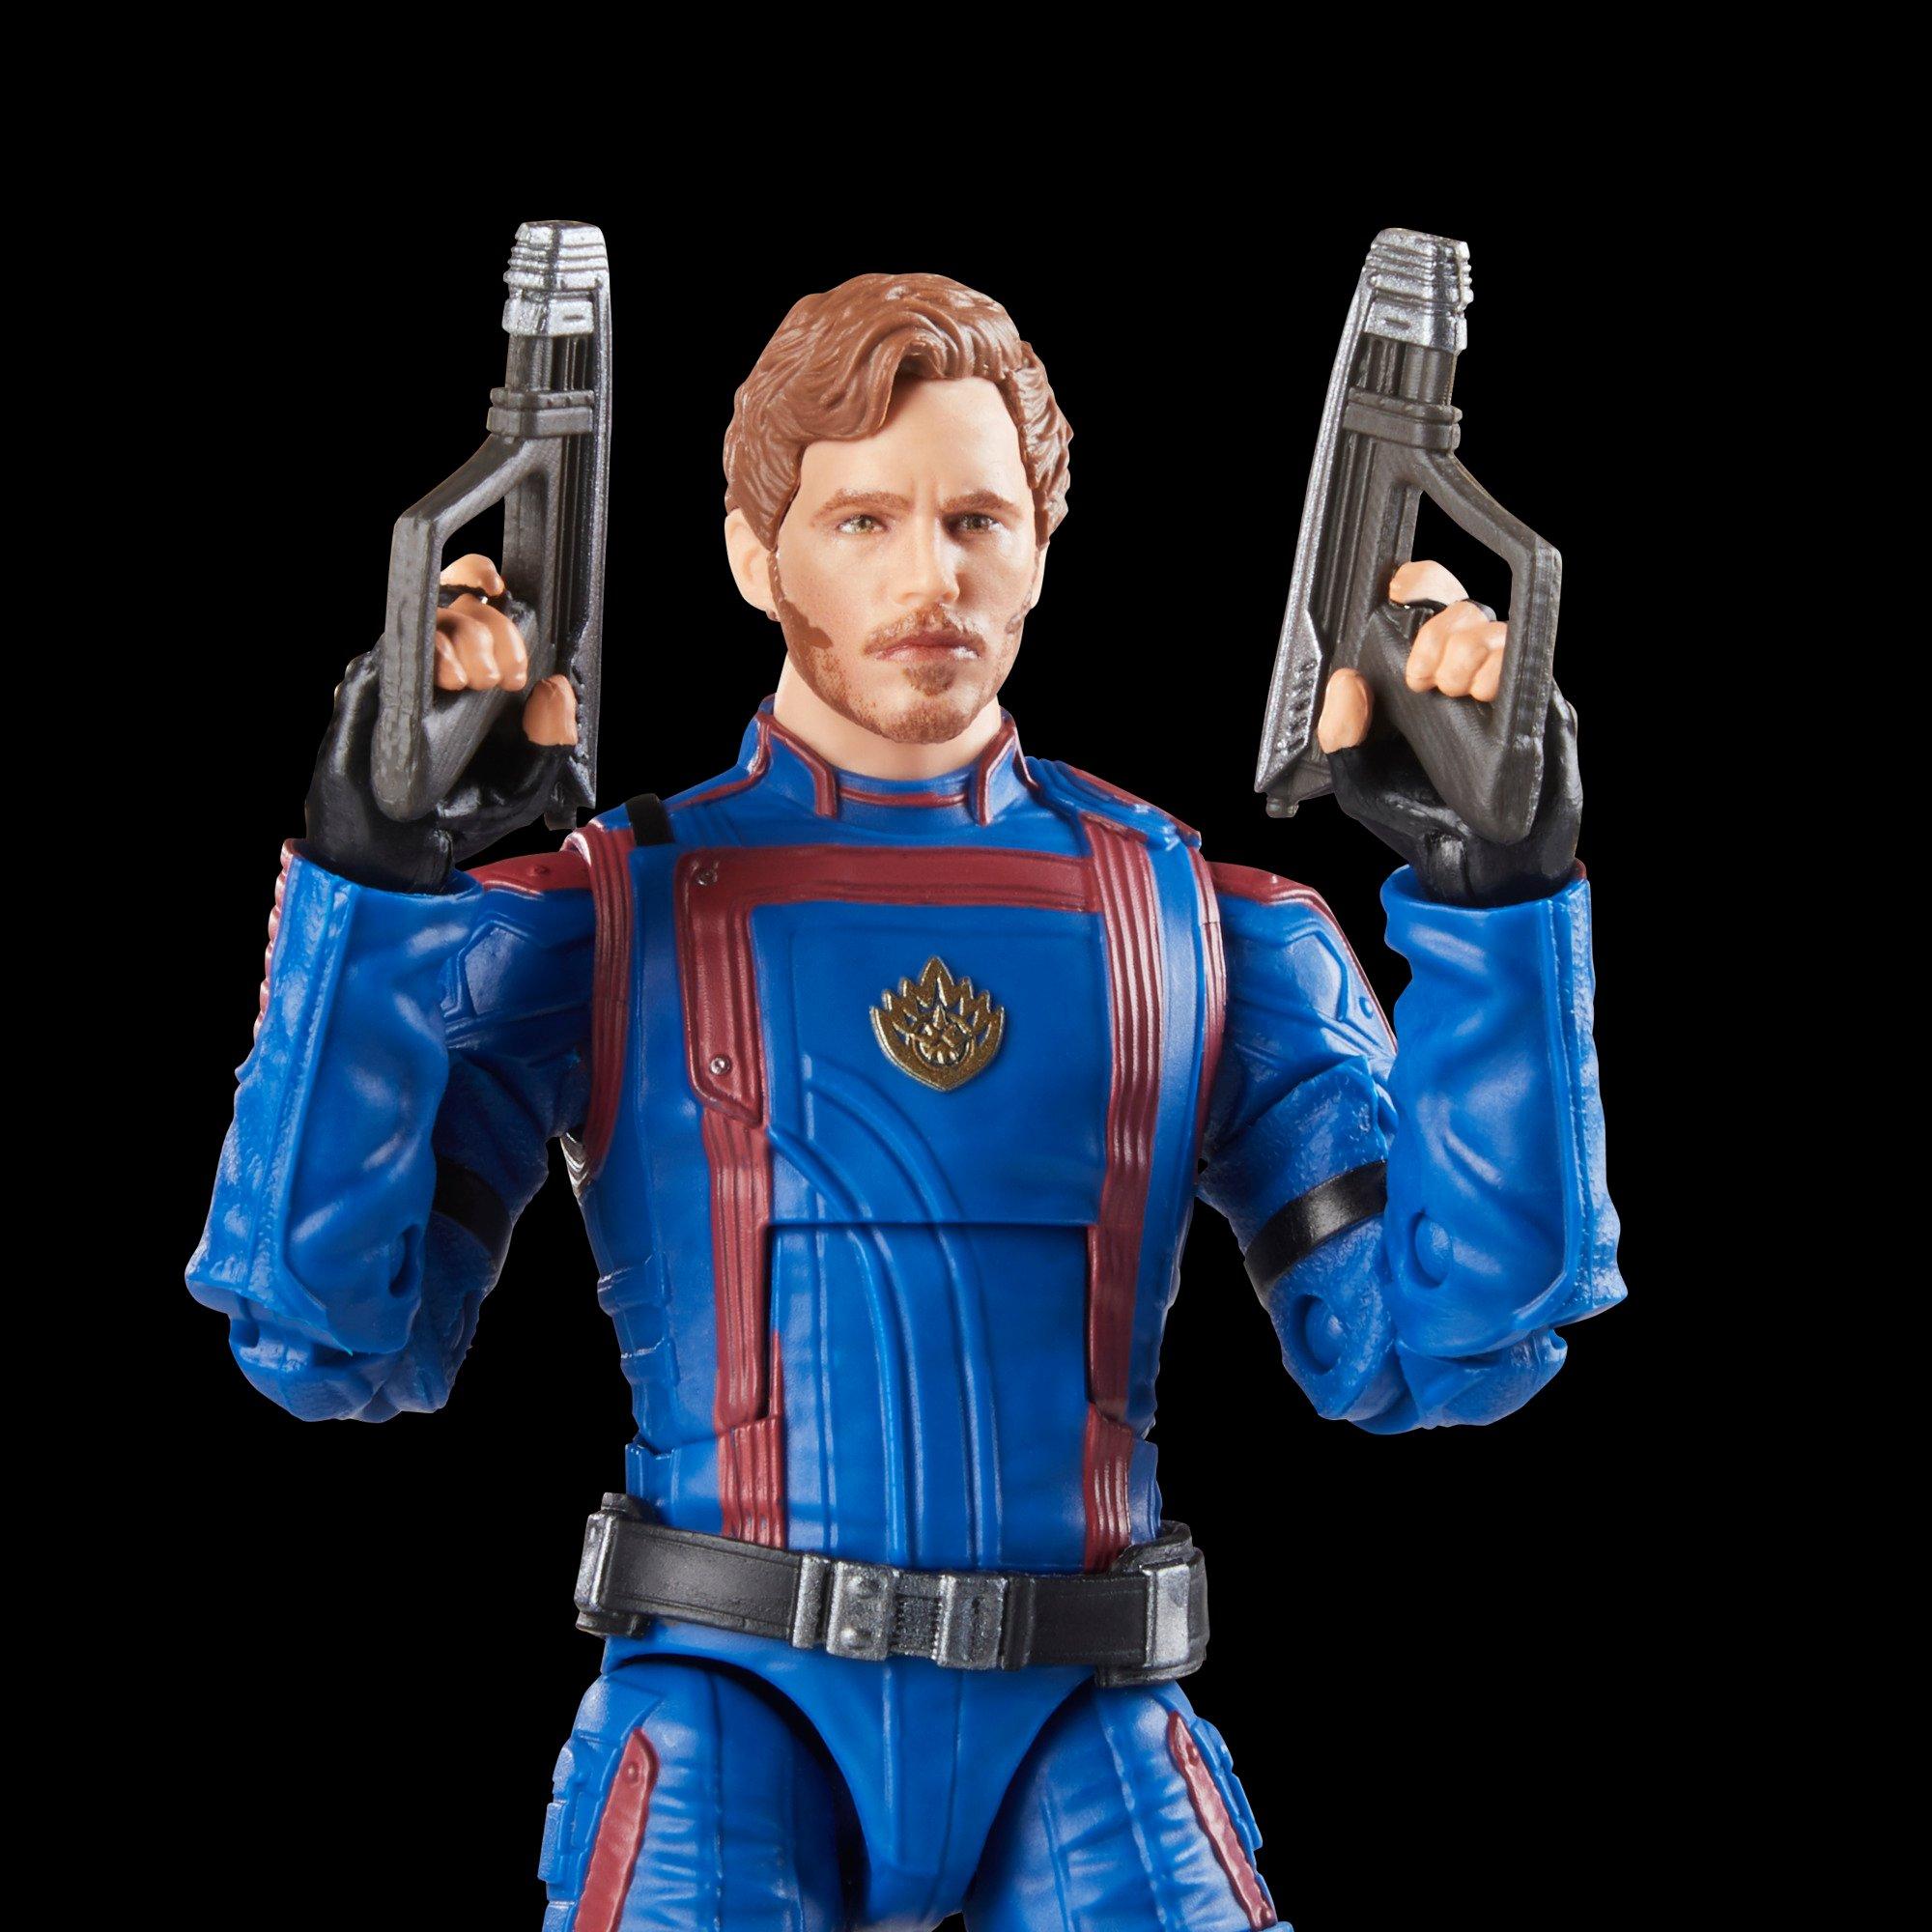 Marvel Guardians of the Galaxy Legends Series STAR-LORD 6 Action Figure